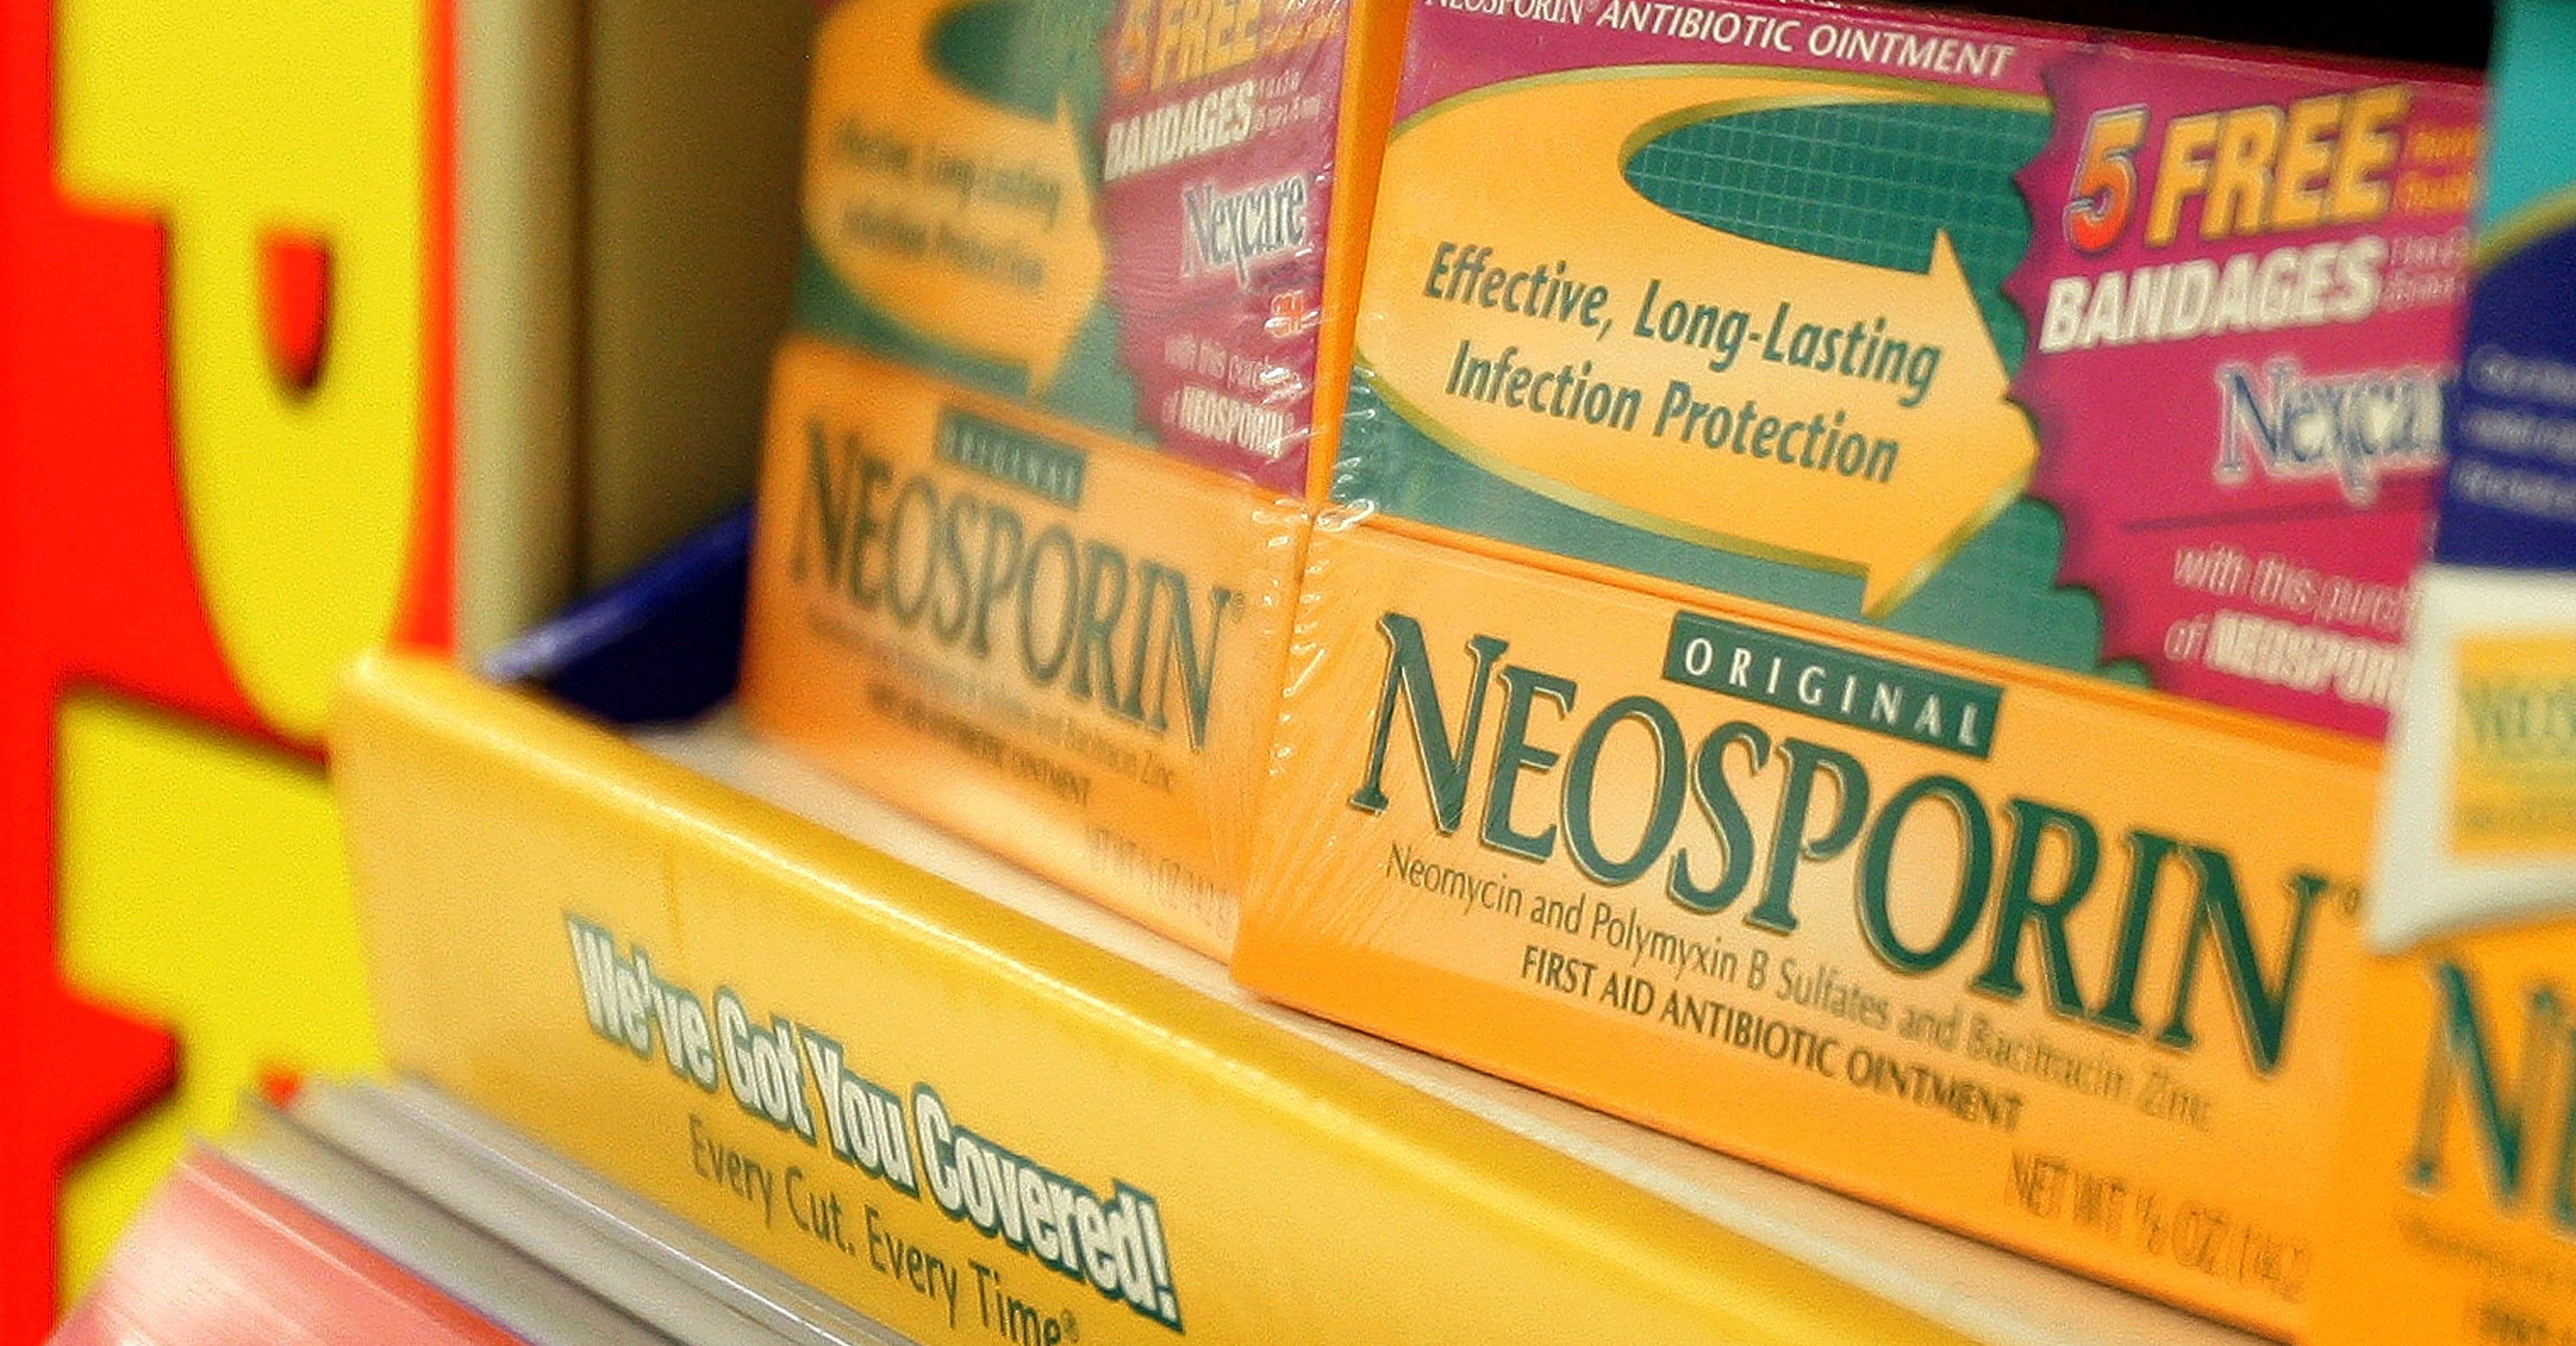 CHICAGO - JUNE 26: Pfizer's Neosporin is displayed on a shelf at a Walgreens store June 26, 2006 in Chicago, Illinois. Johnson &amp; Johnson is buying Pfizer Inc.'s consumer healthcare division, which includes Listerine, Sudafed, and Visine, for $16.6 billion. (Photo by Tim Boyle/Getty Images)